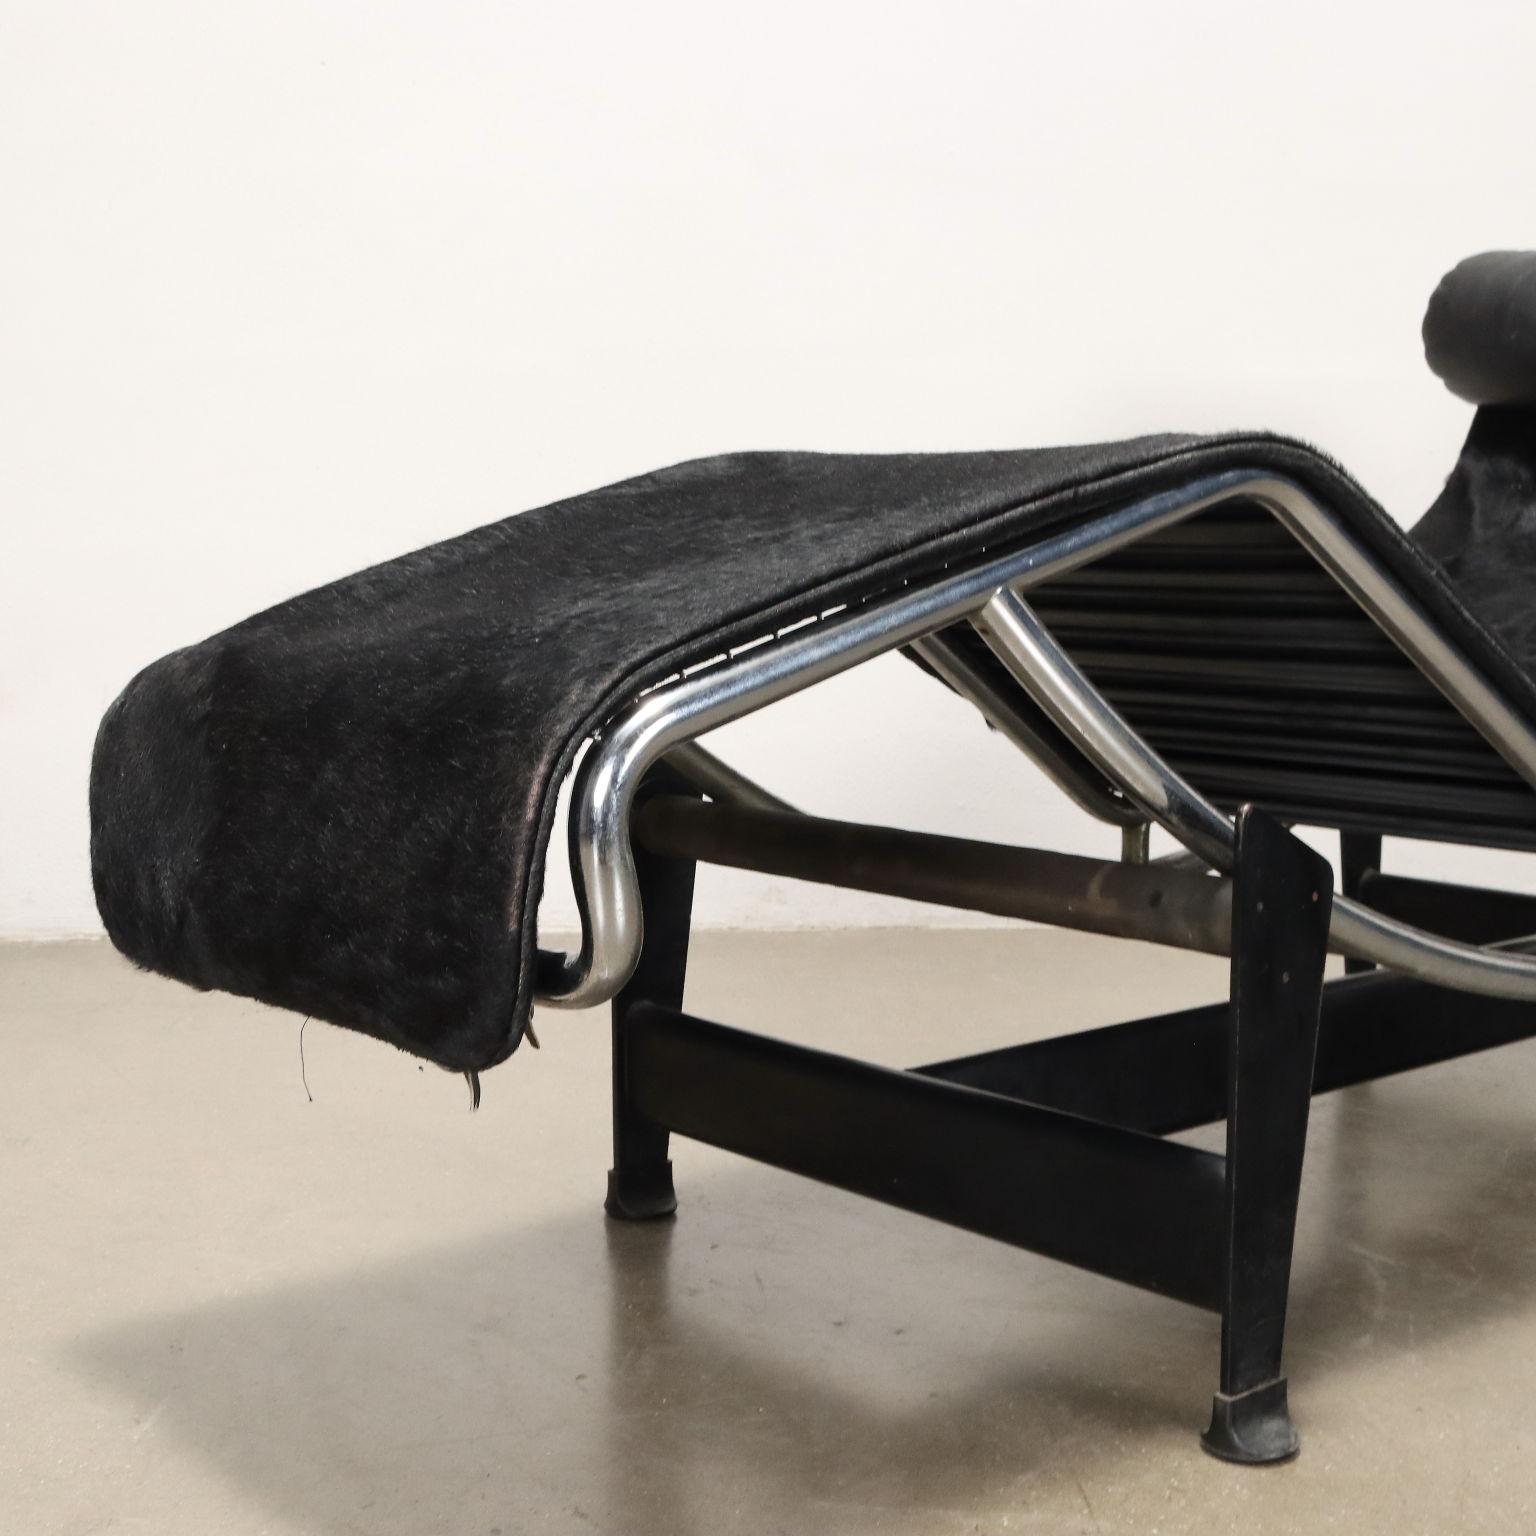 Chaise Longue Modell 'LC4' Le Corbusier für Cassina 1980er Jahre (Late 20th Century) im Angebot